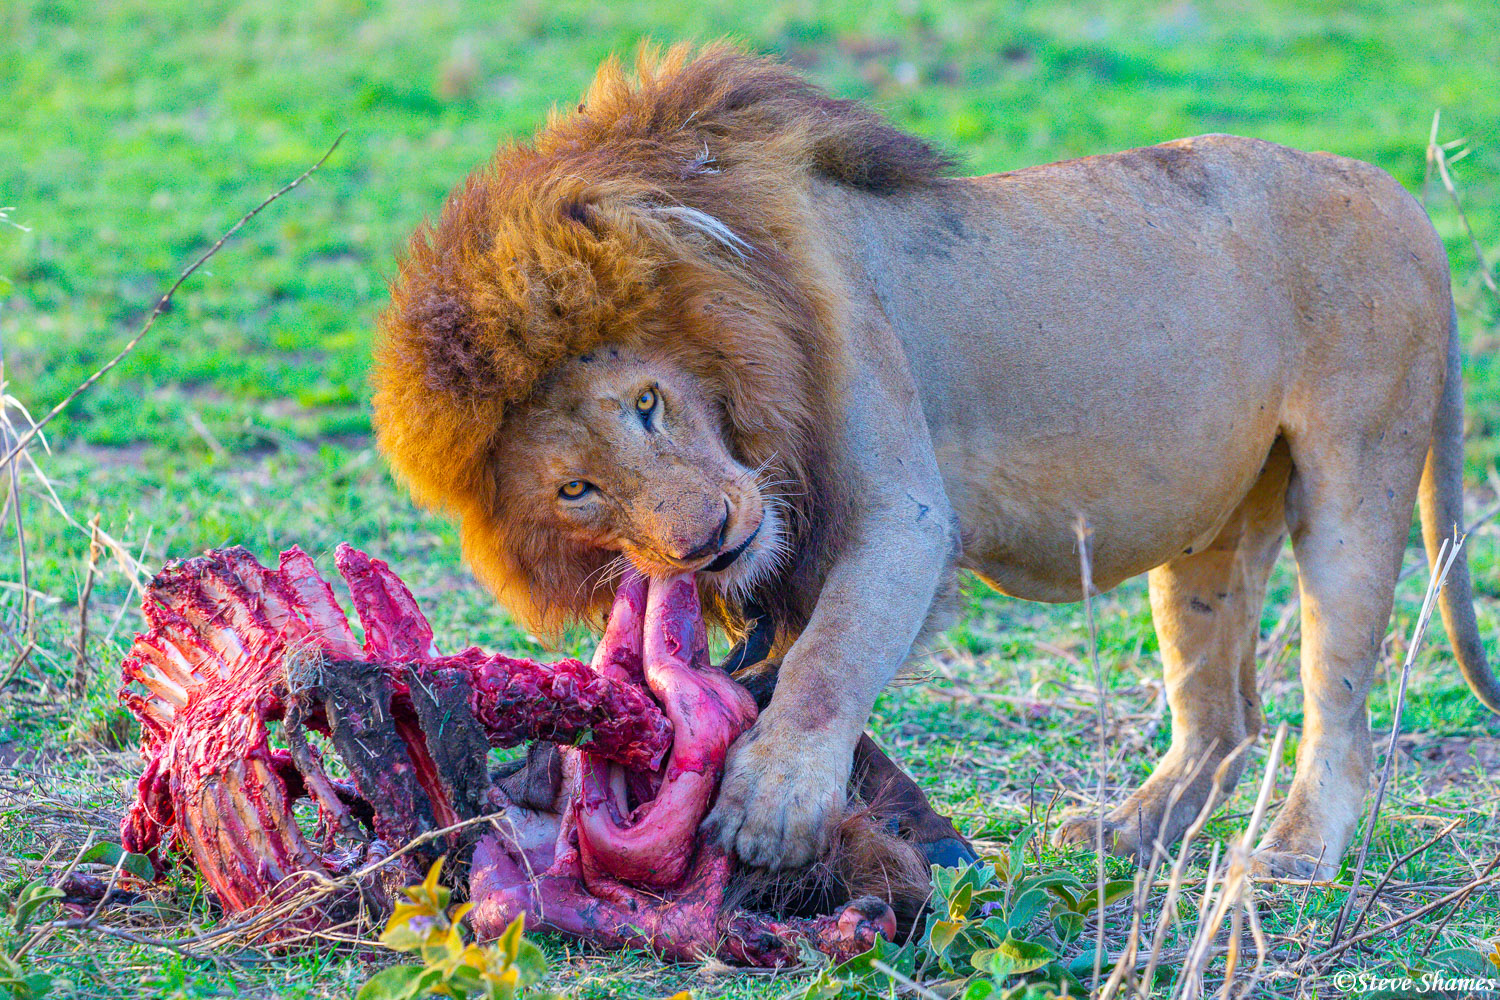 Yummy! An early morning meal of wildebeest.